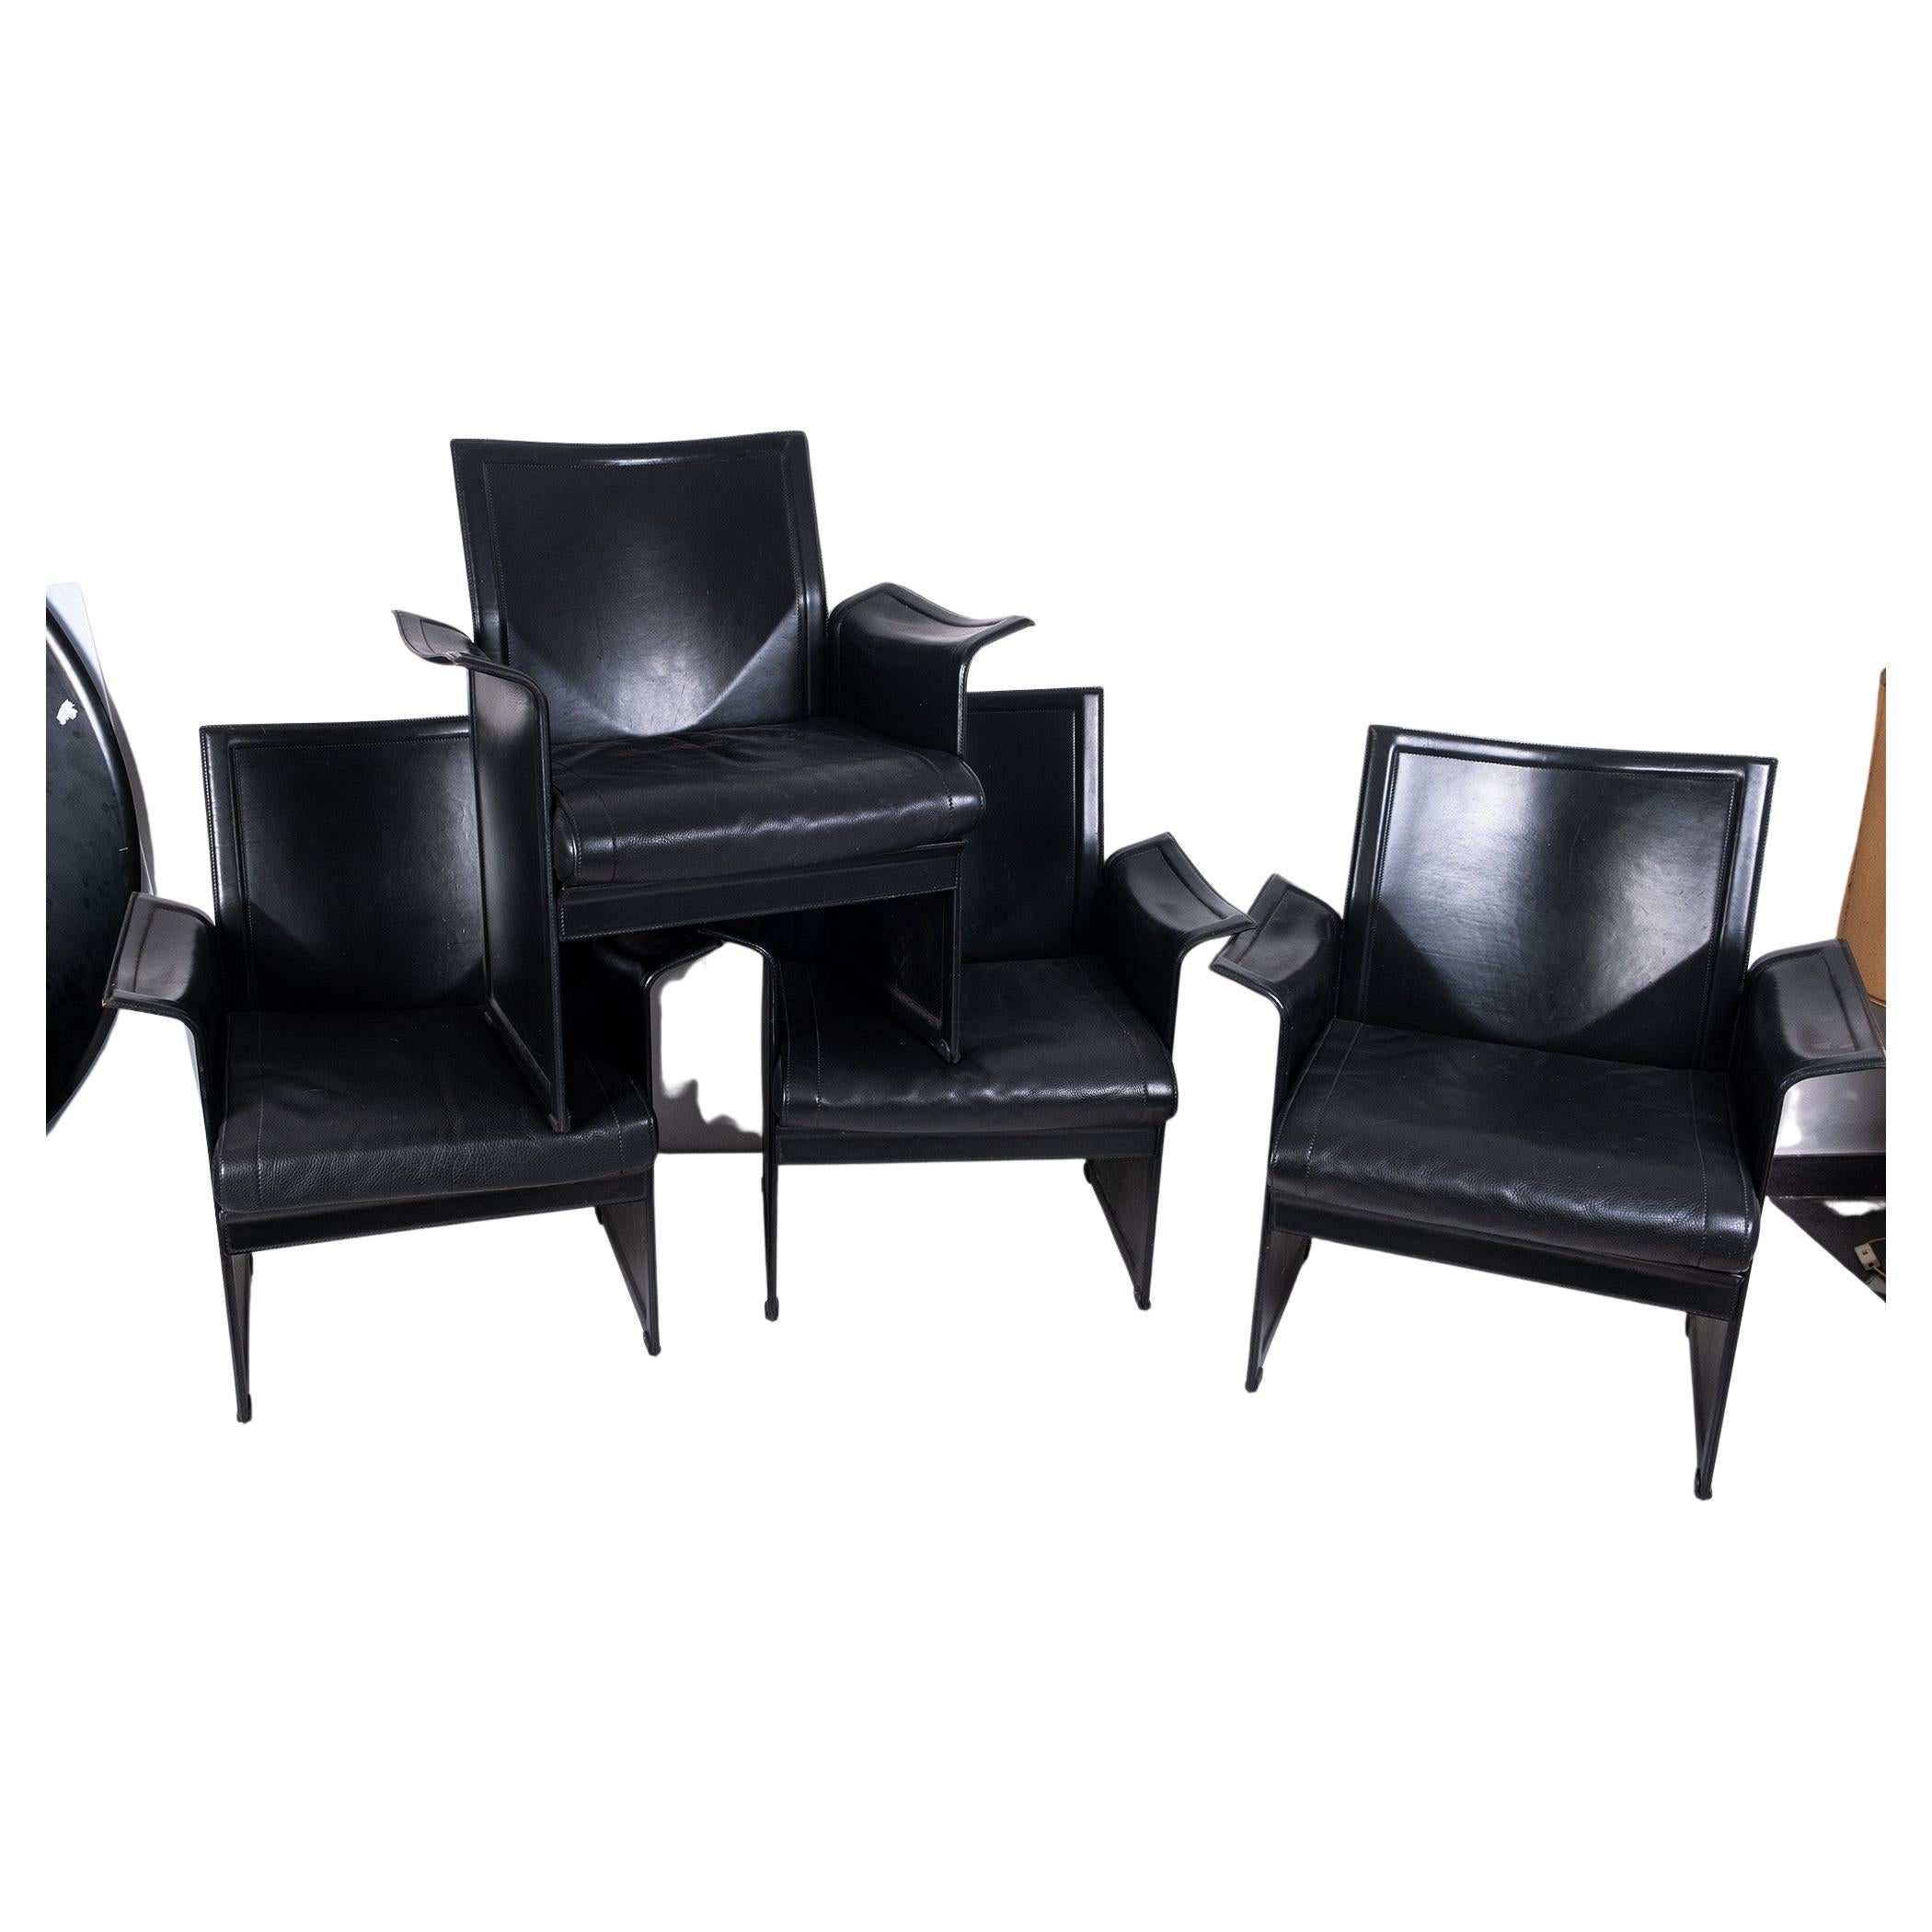 Late 20th Century Set of 4 Korium Armchairs by Tito Agnoli for Matteo Grassi, 1970s For Sale